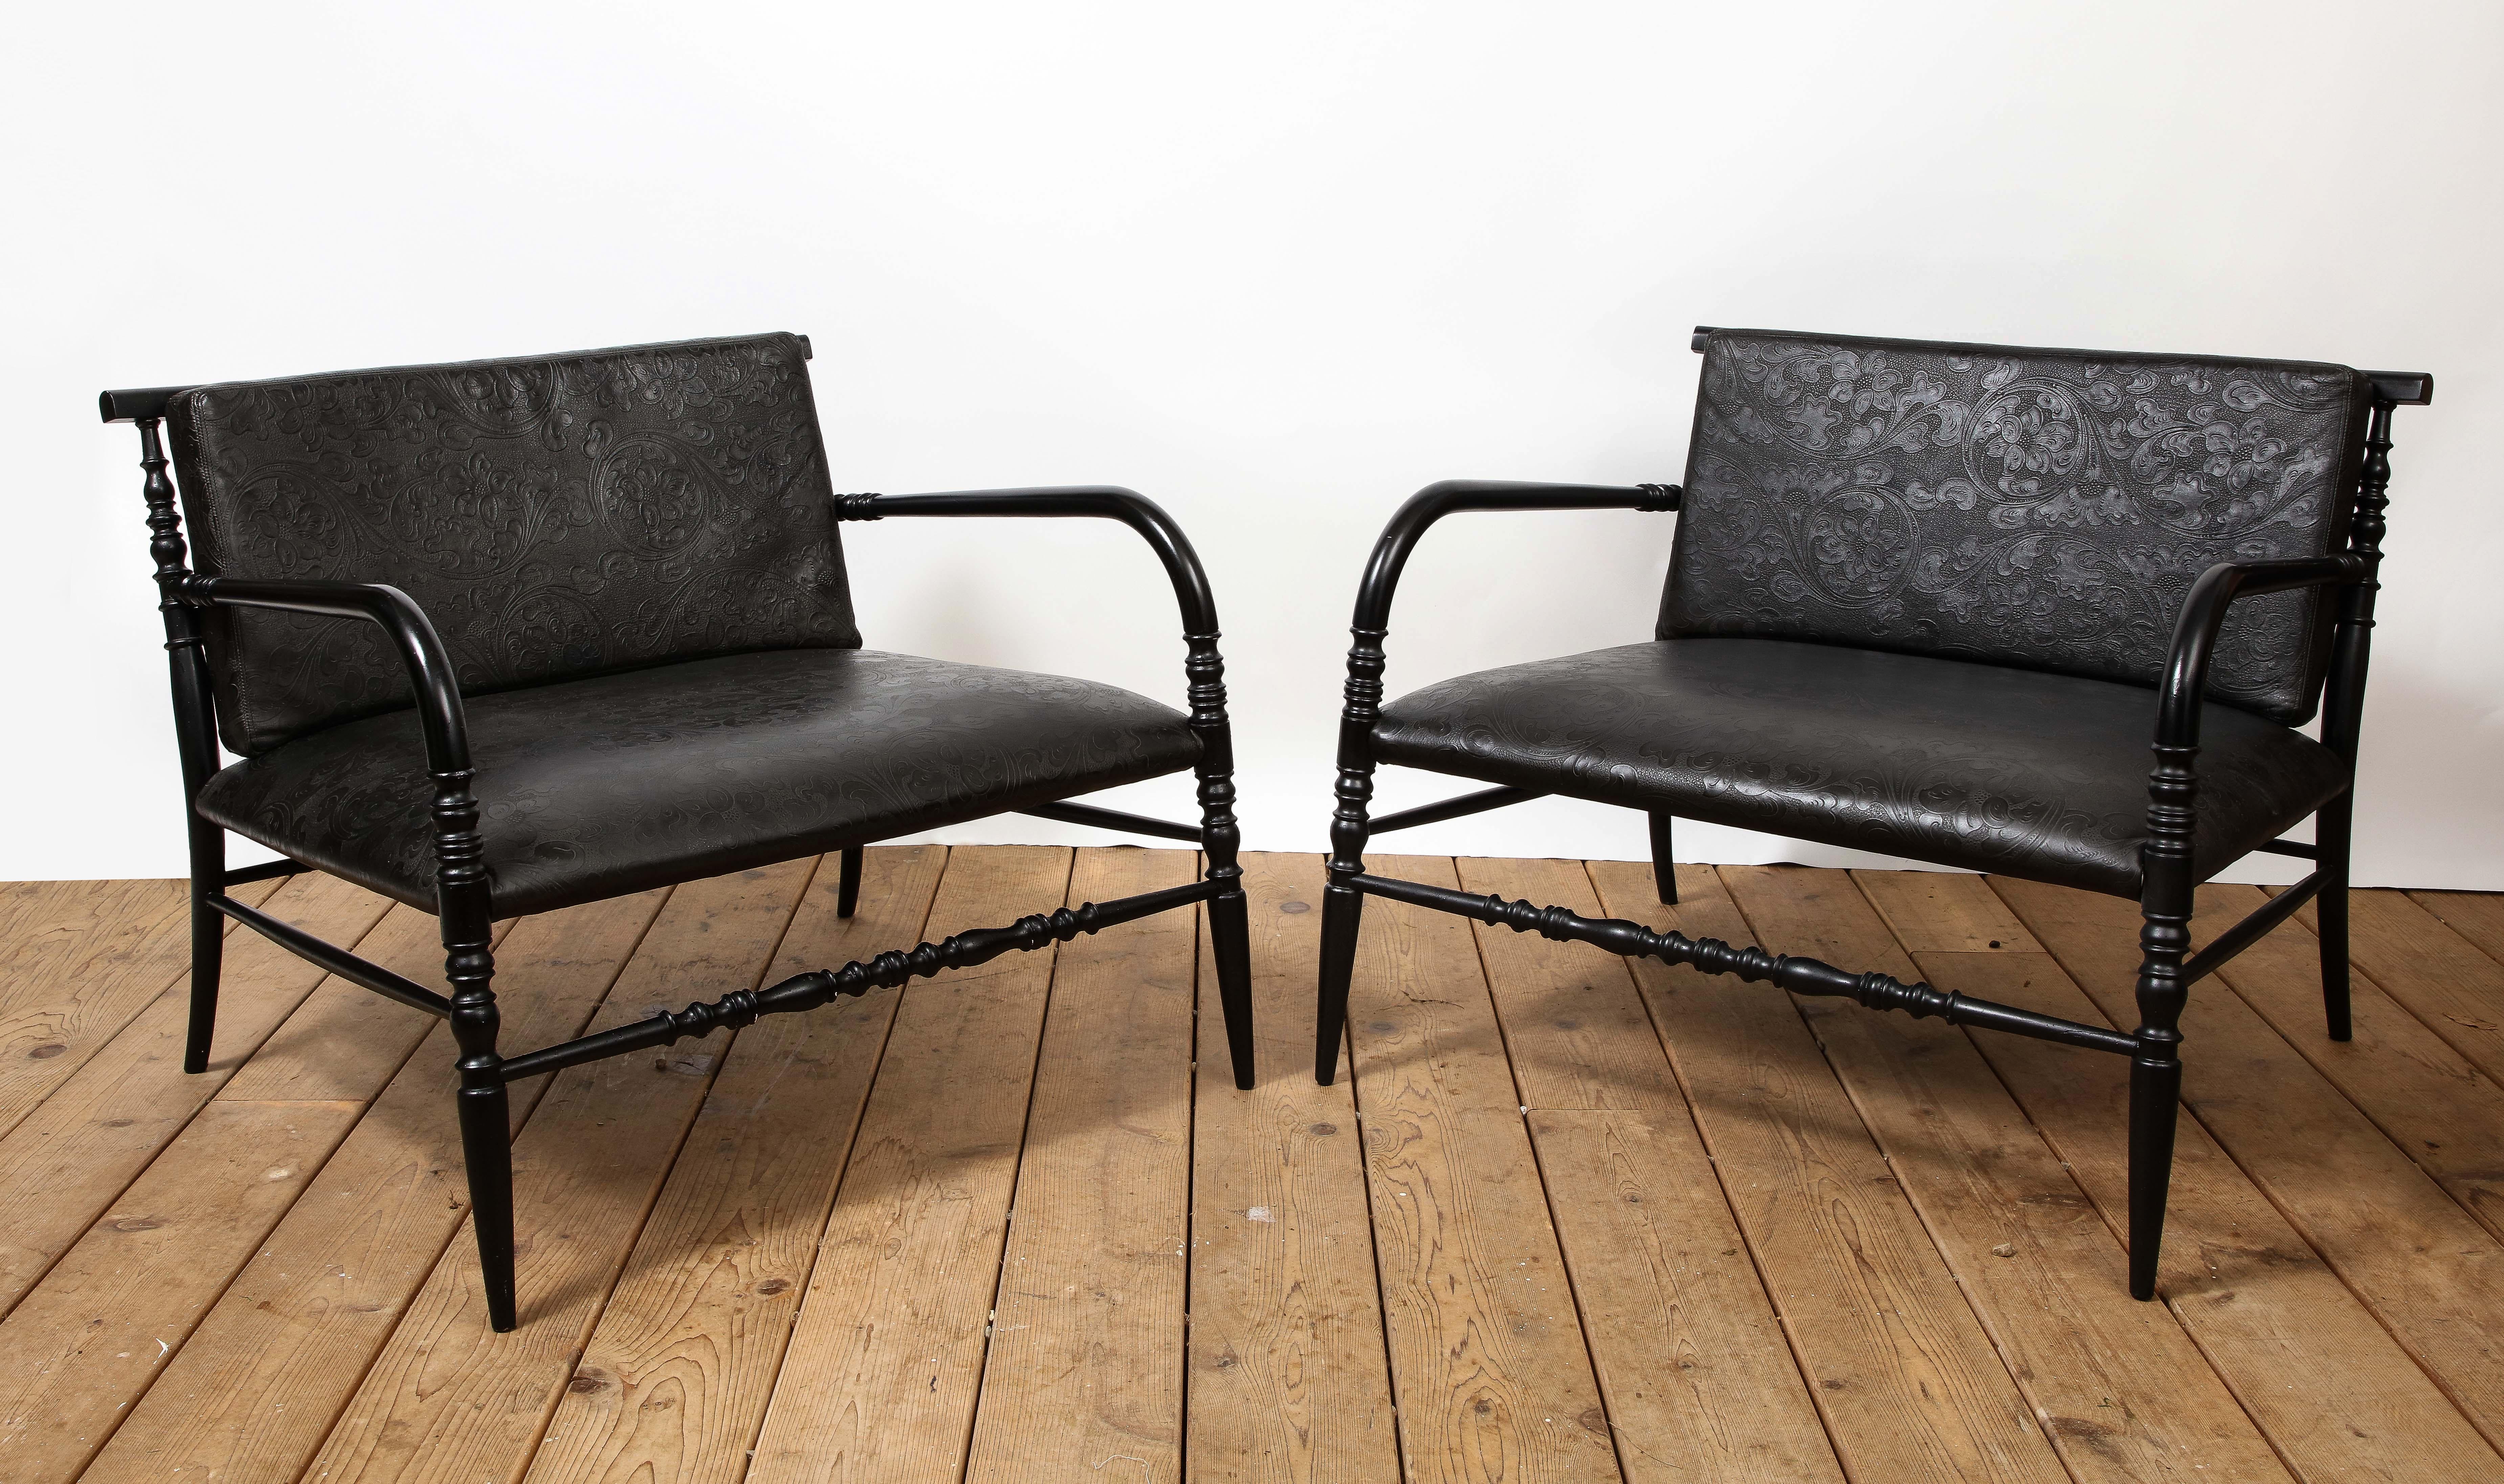 Pair of 20th century American low-slung lounge chairs with embossed black leather seats and backs on turned wood frames. 

Additional dimensions: 
AH 21